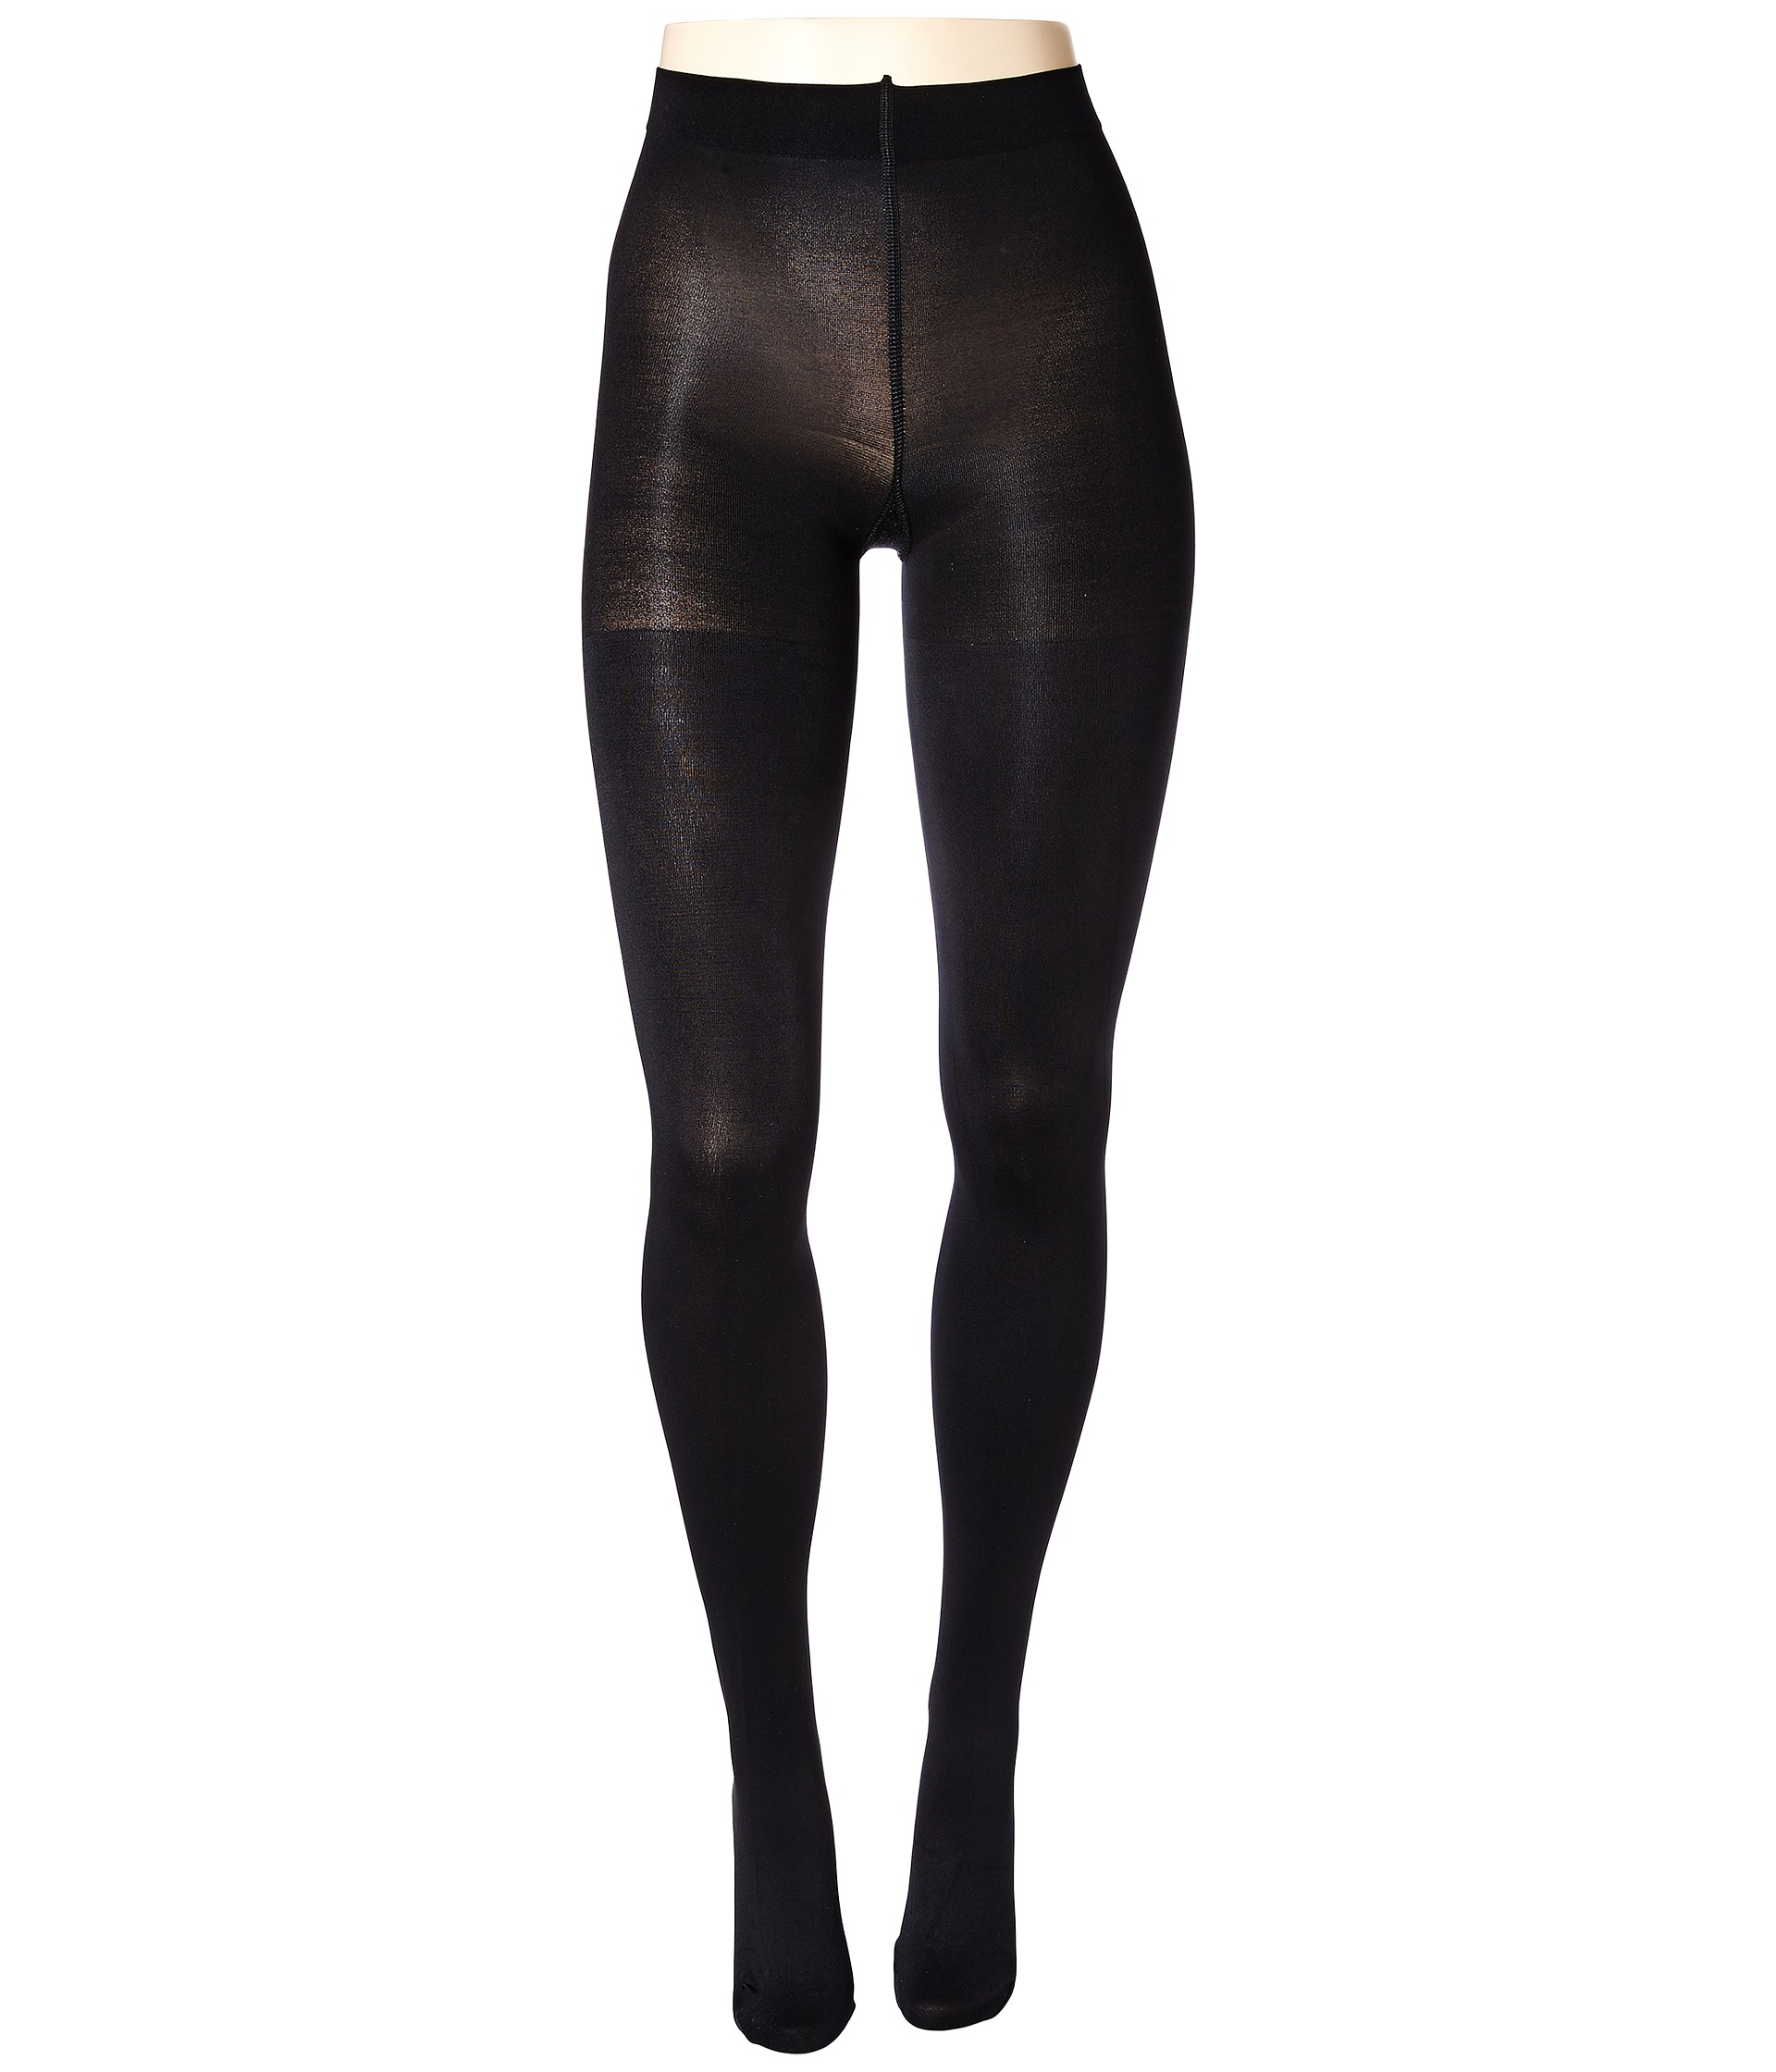 Spanx Luxe Leg Blackout Shaping Tights at Zappos.com